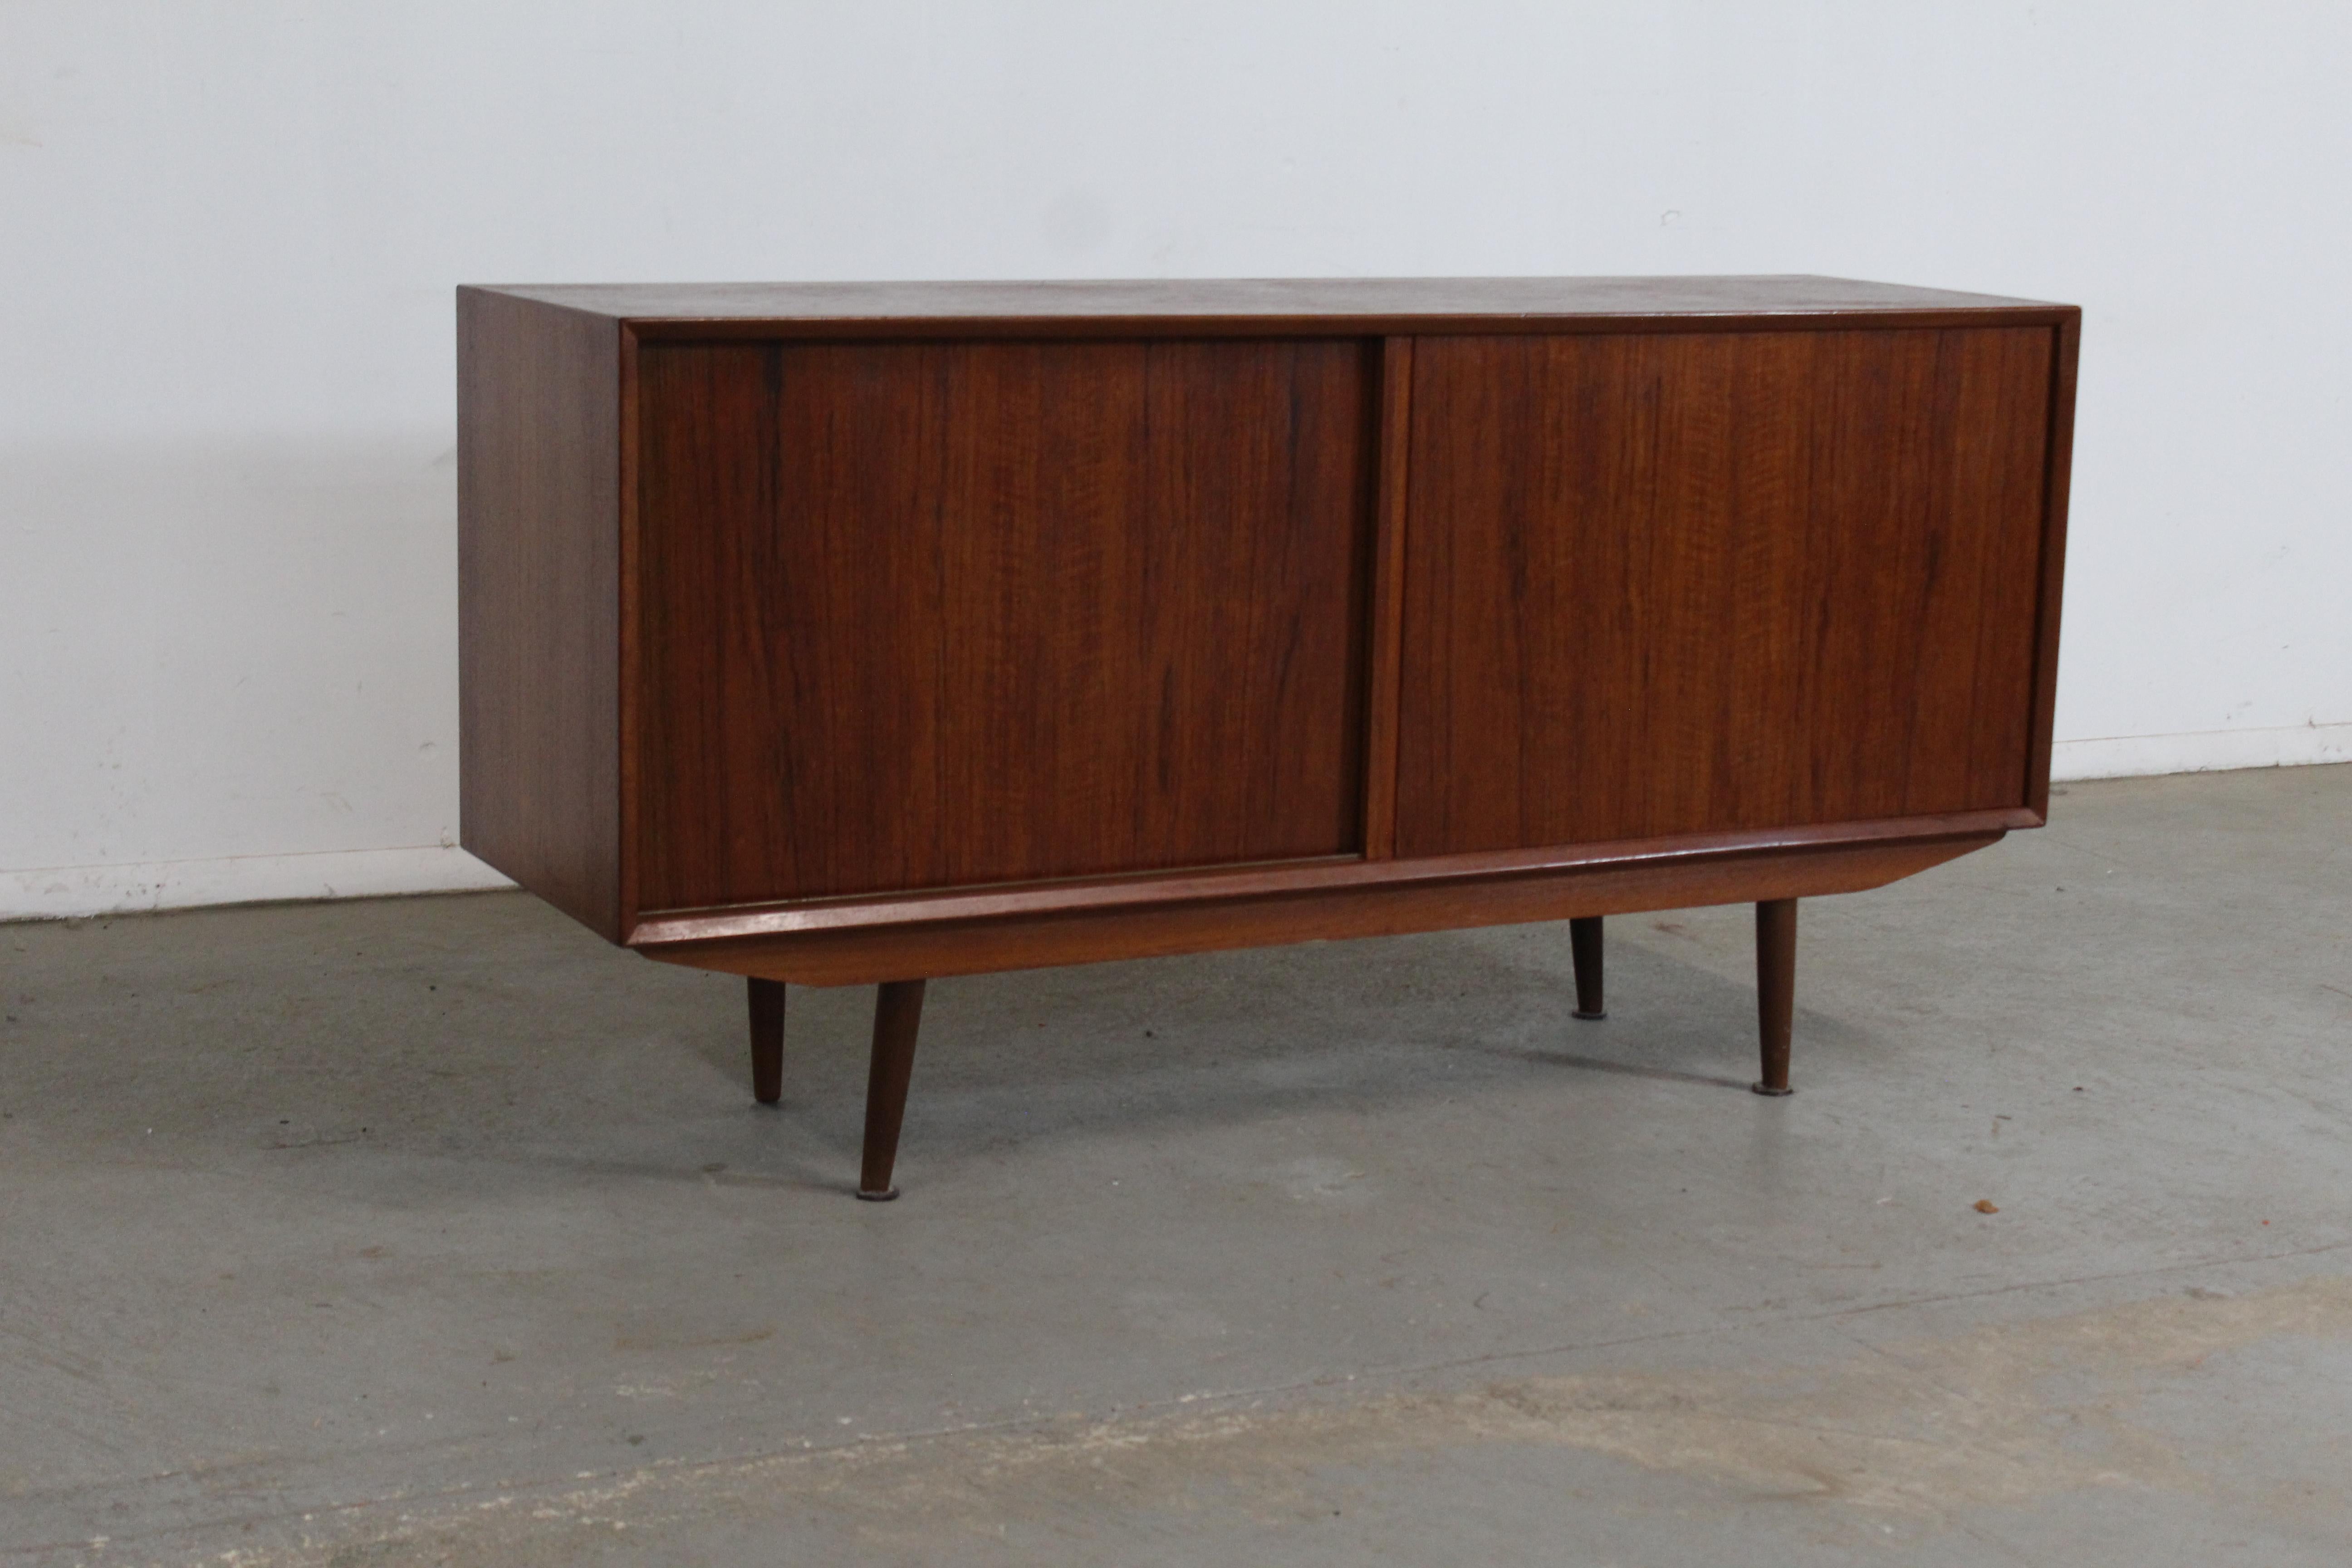 Mid-Century Danish Modern Teak Credenza

Offered is a teak credenza. This piece makes a statement and will make a nice feature piece in any room. The credenza is made of teak and is highly functional with plenty of storage. Features pencil legs,